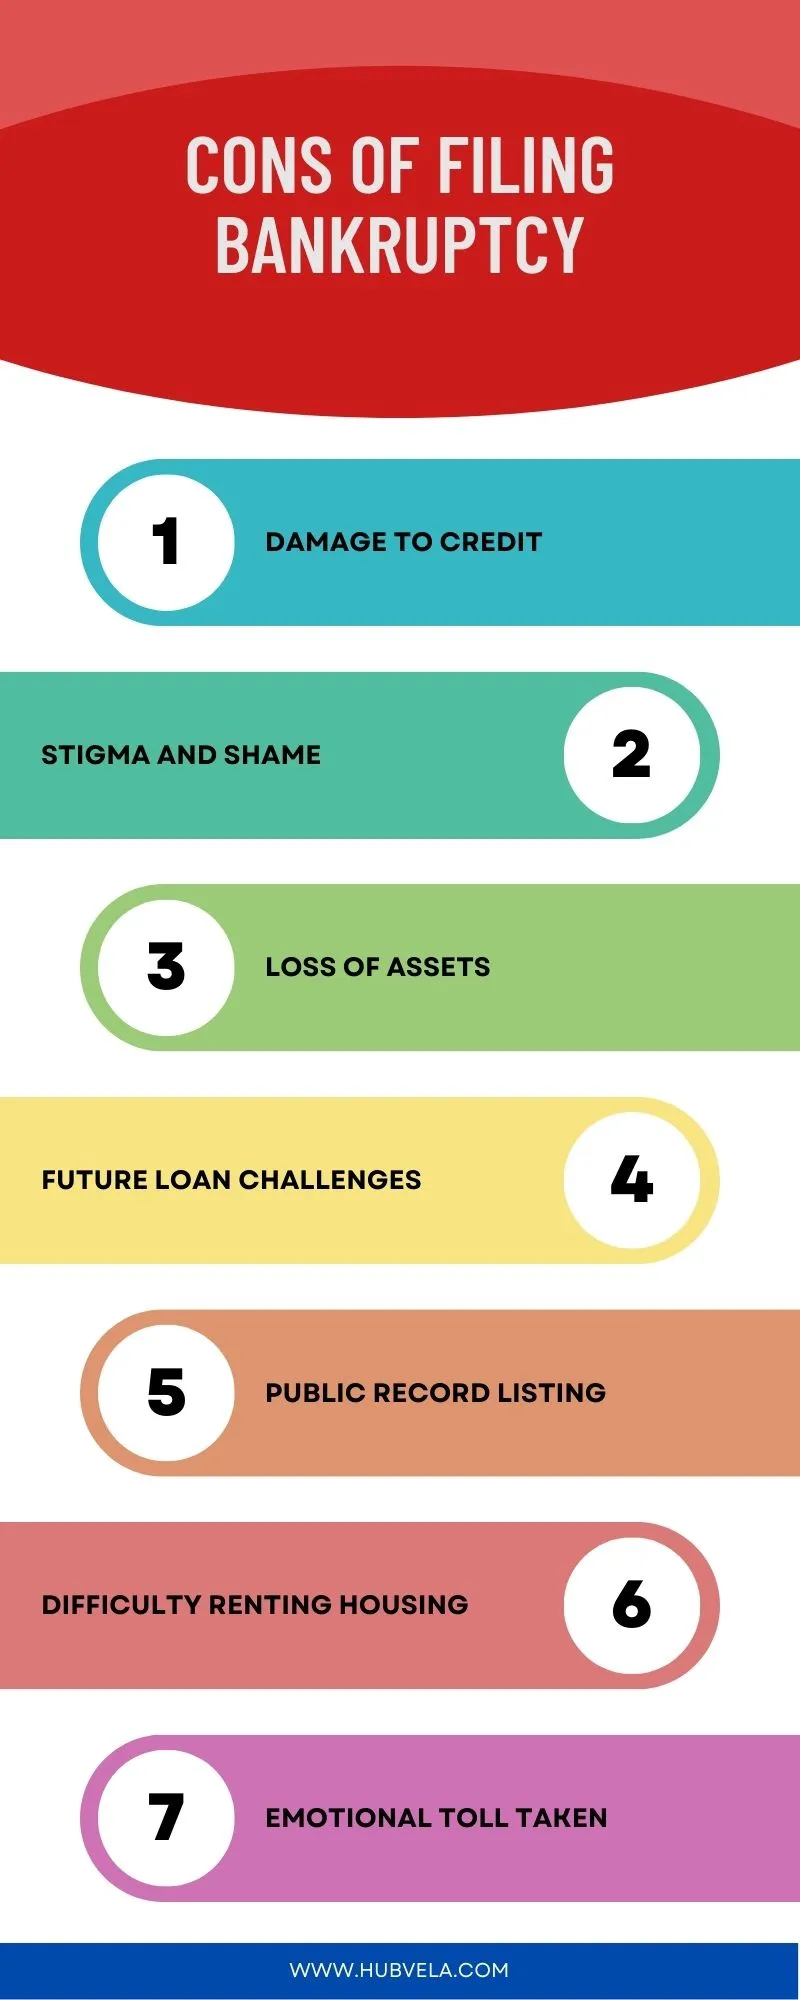 Cons Of Filing Bankruptcy Infographic